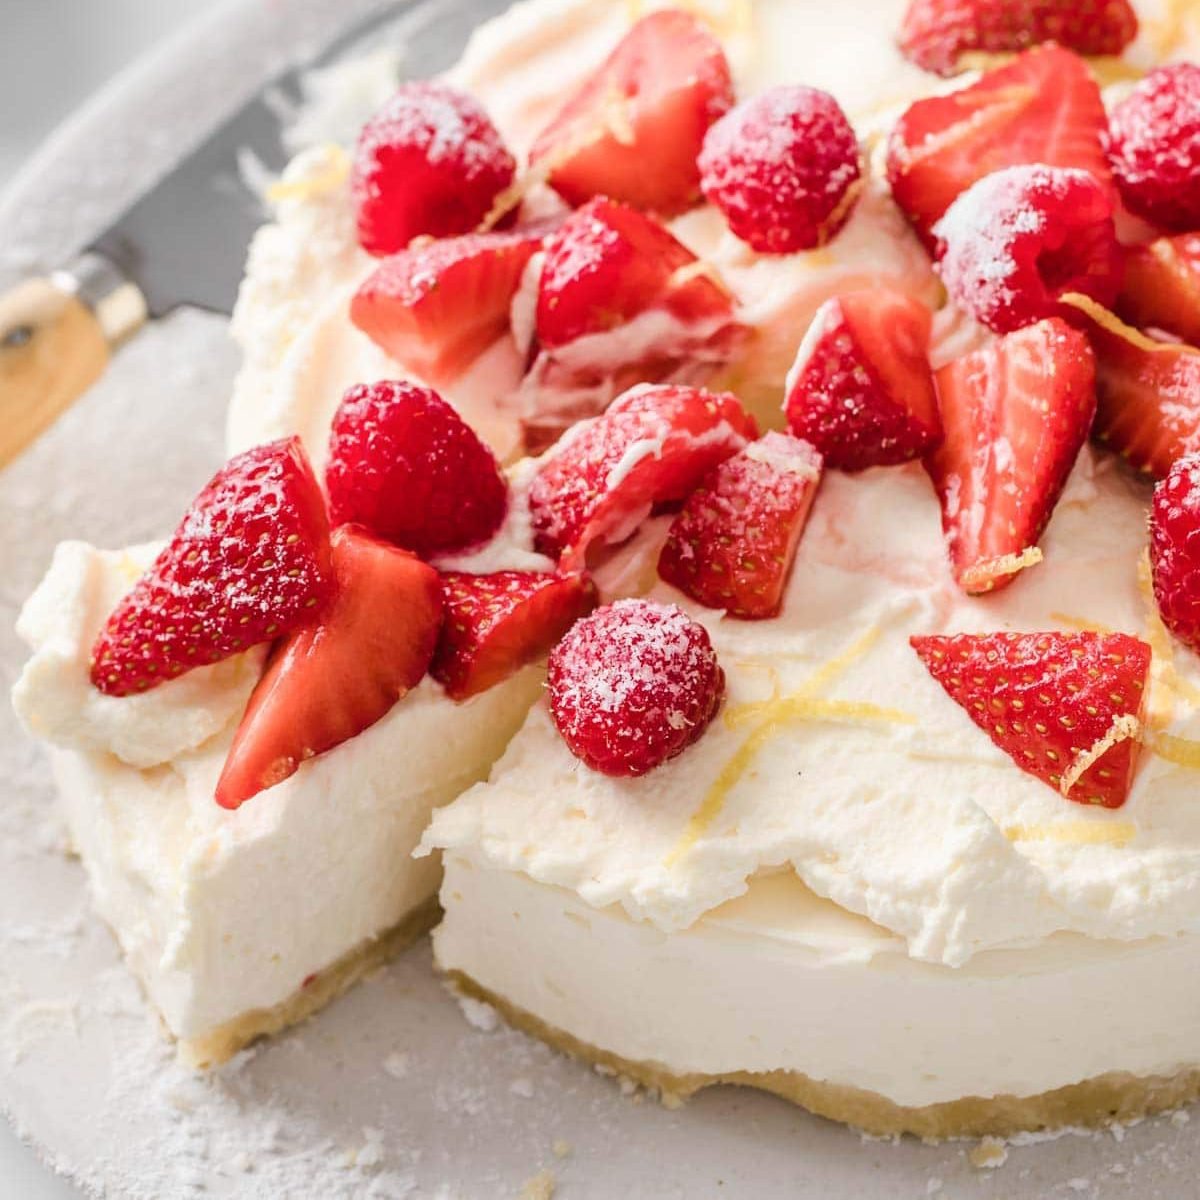 11 Sugar Free Desserts For Your Sweet